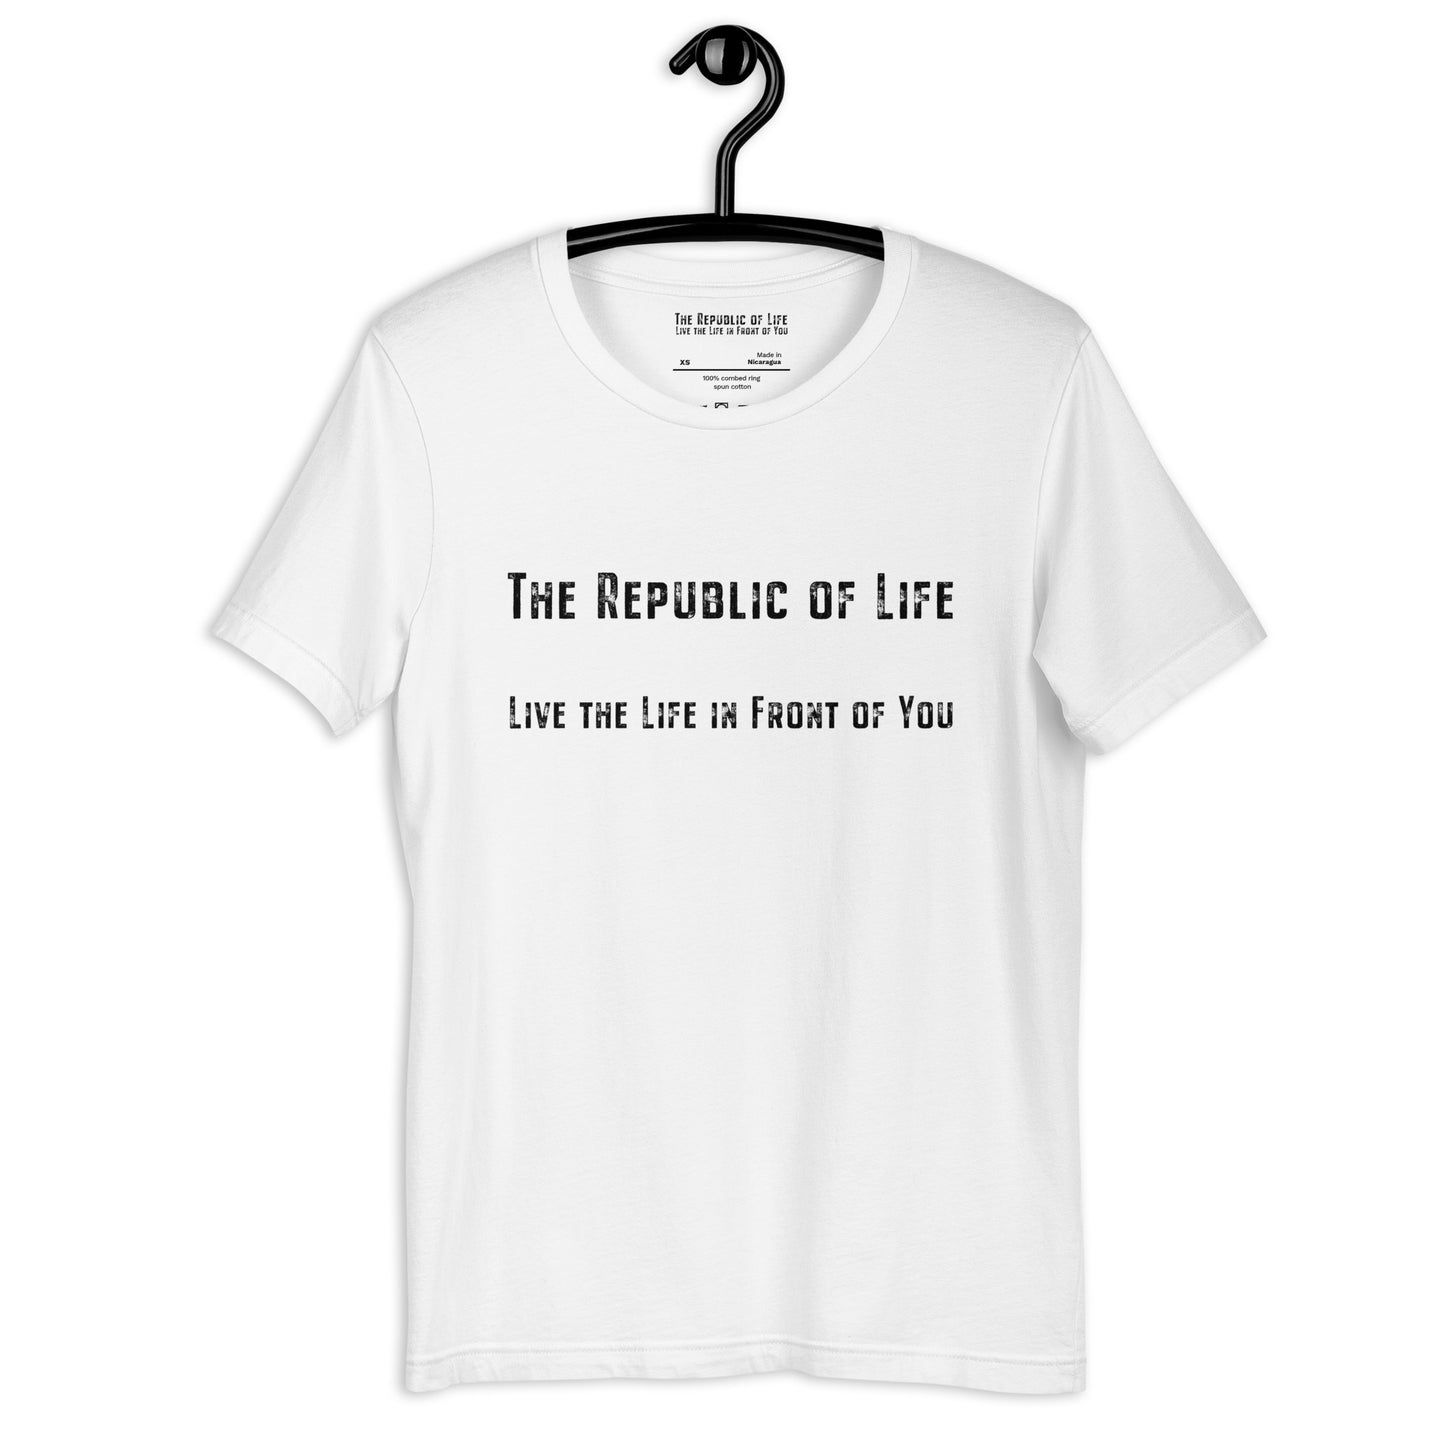 The Republic of Life Live the Life in Front of You classic T